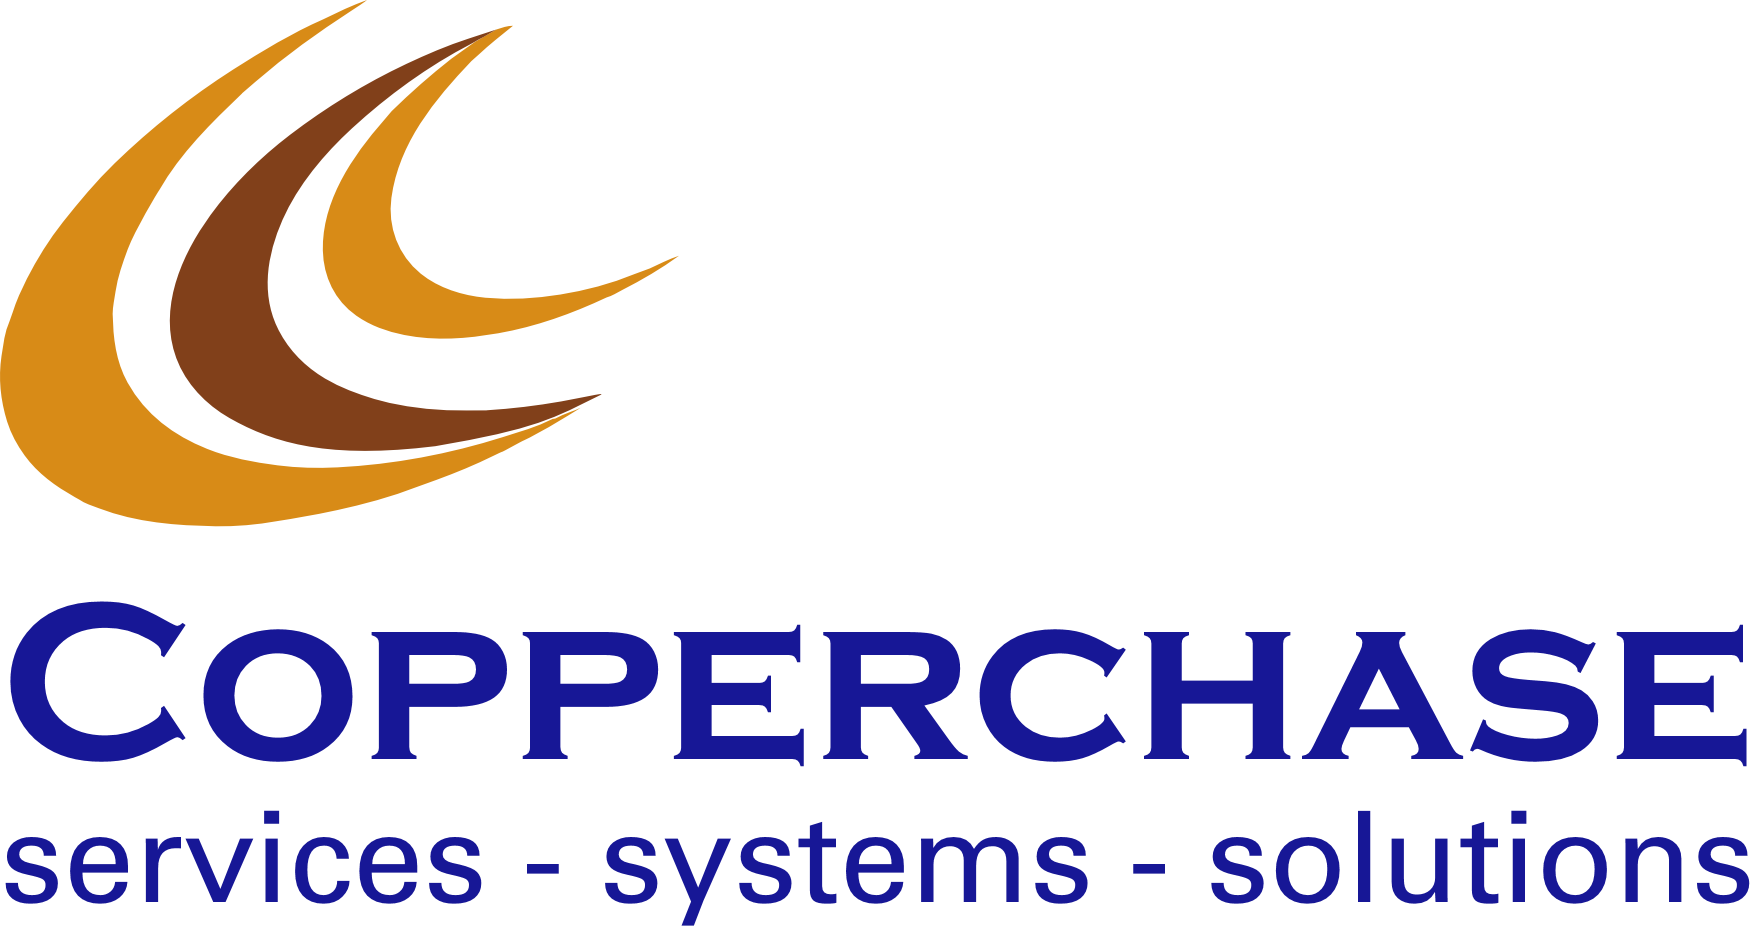 Copperchase